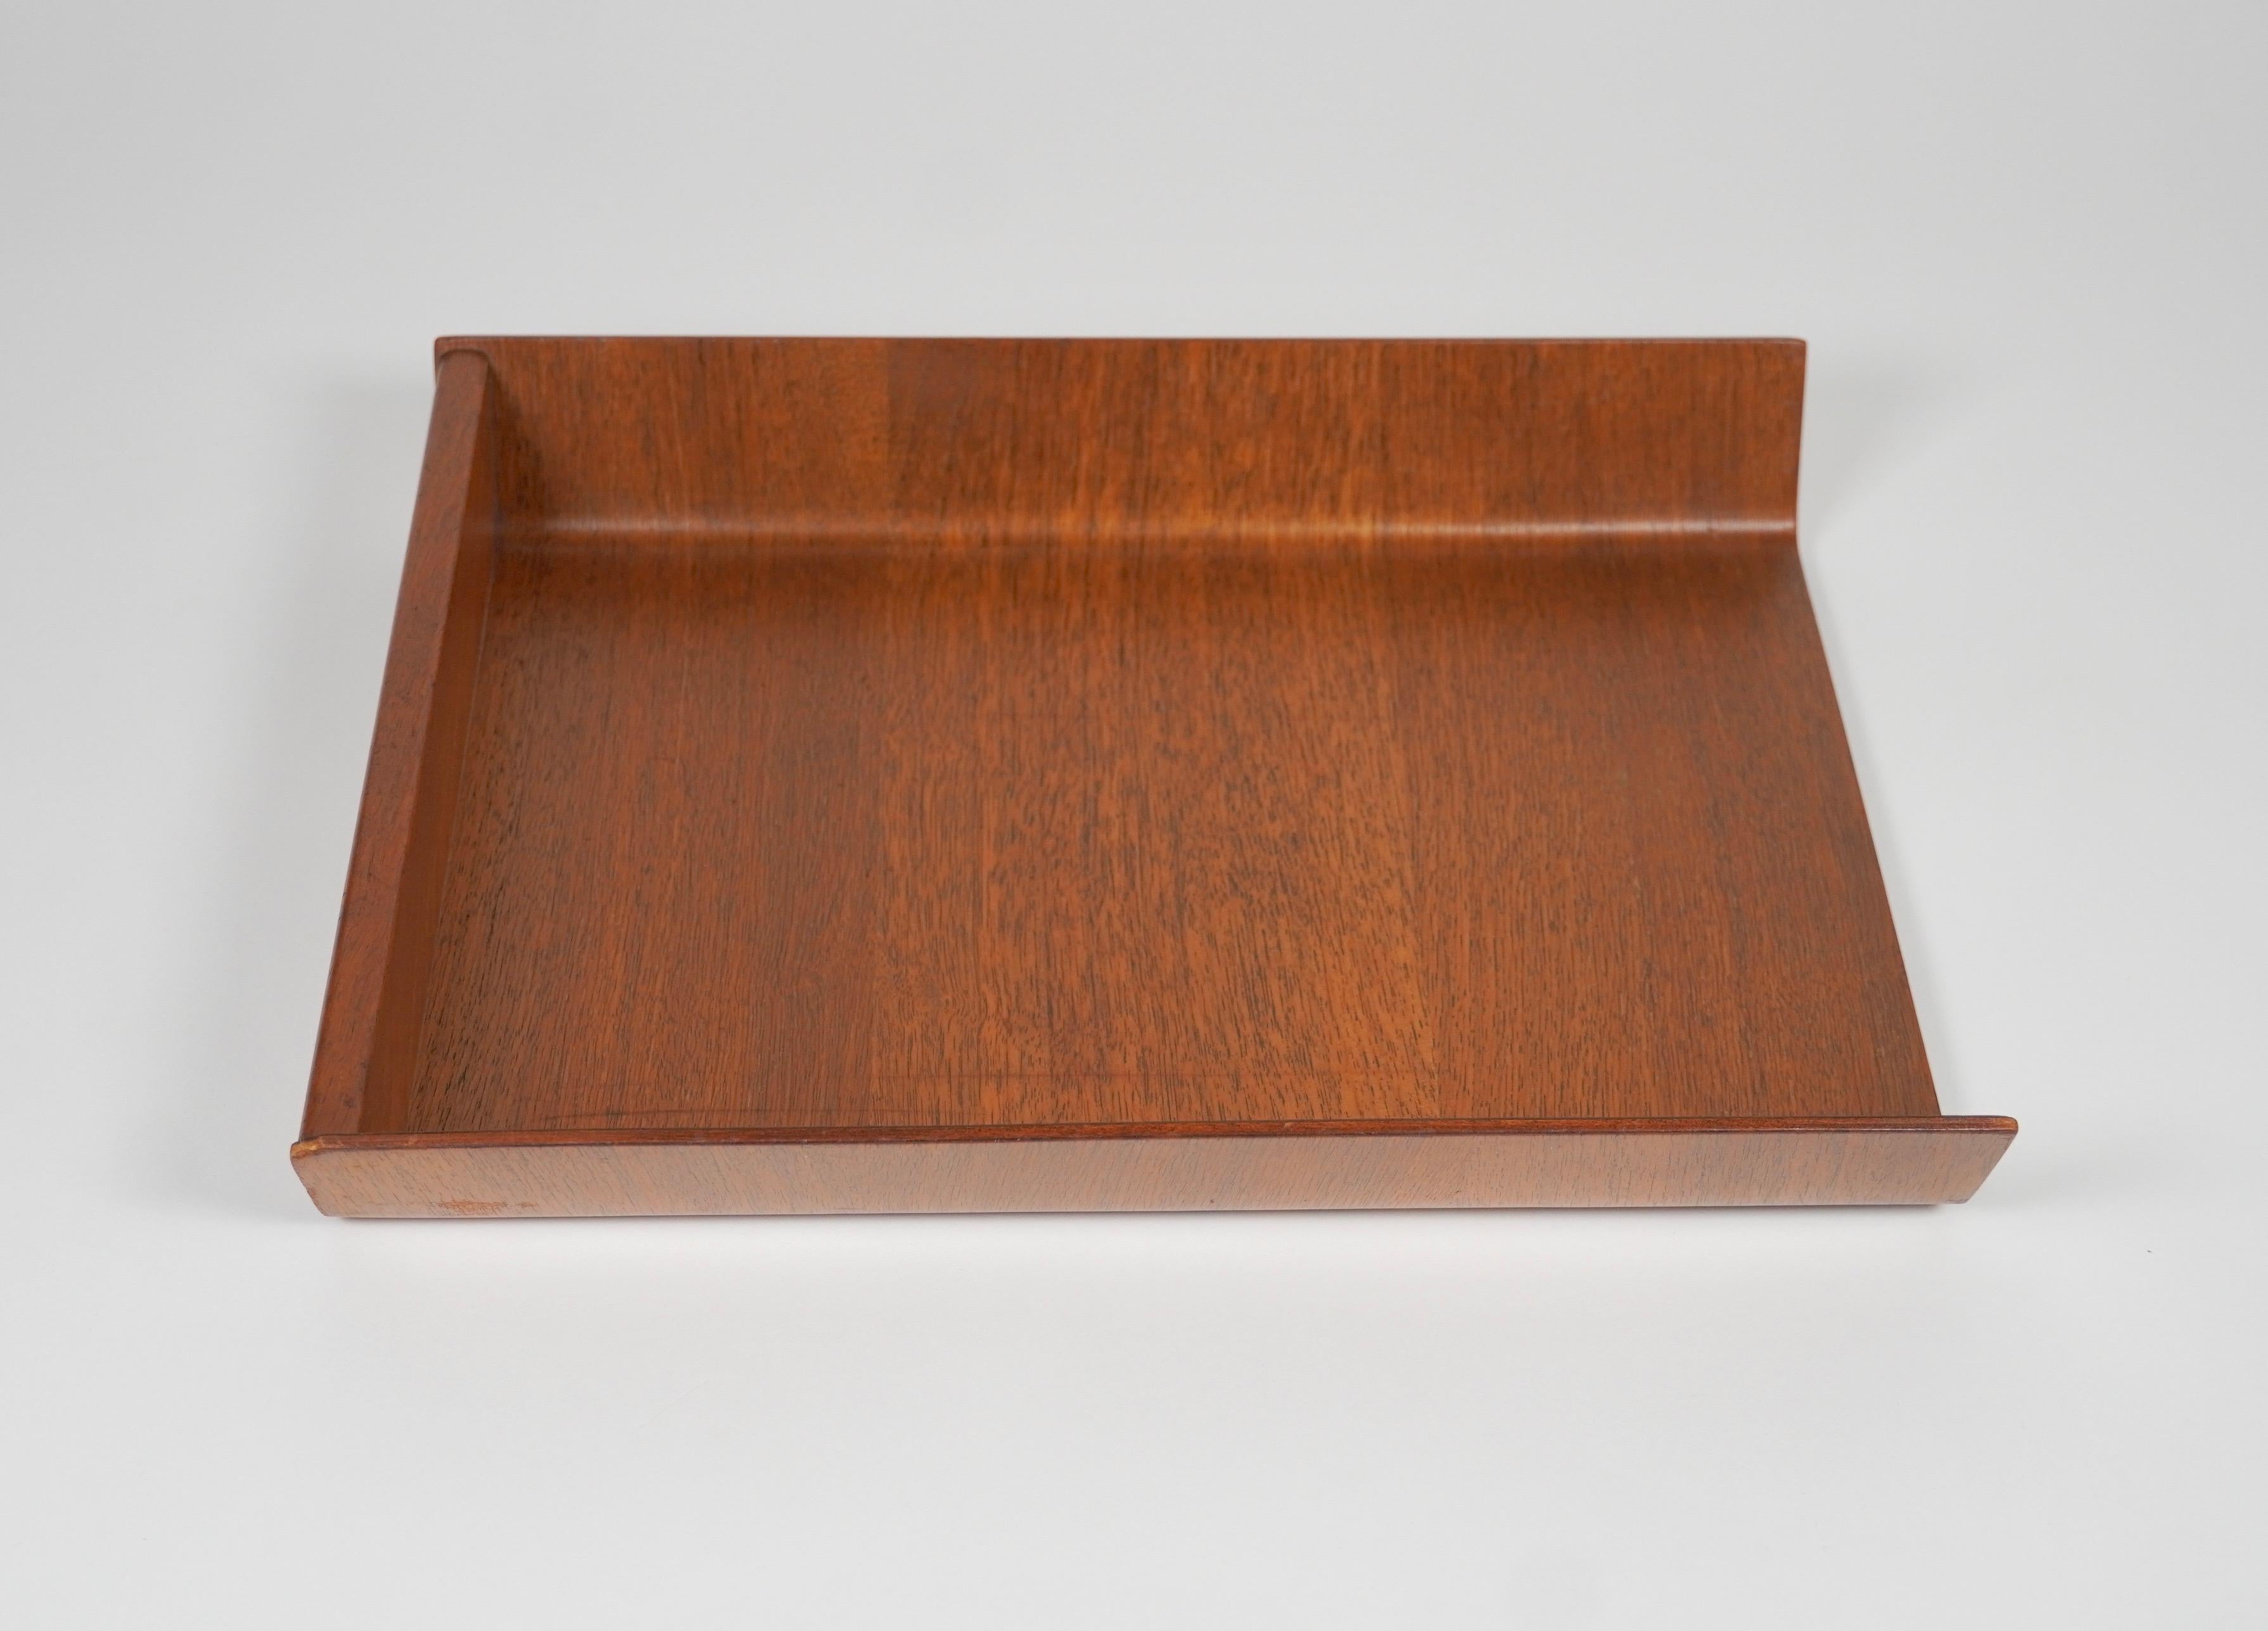 Designed by Florence Knoll in 1948, this letter tray is made of walnut plywood and was a staple of midcentury office decor. The underside bears the fabric Knoll label with 320 Park Avenue pre zip code address, indicating manufacture 1950s to pre